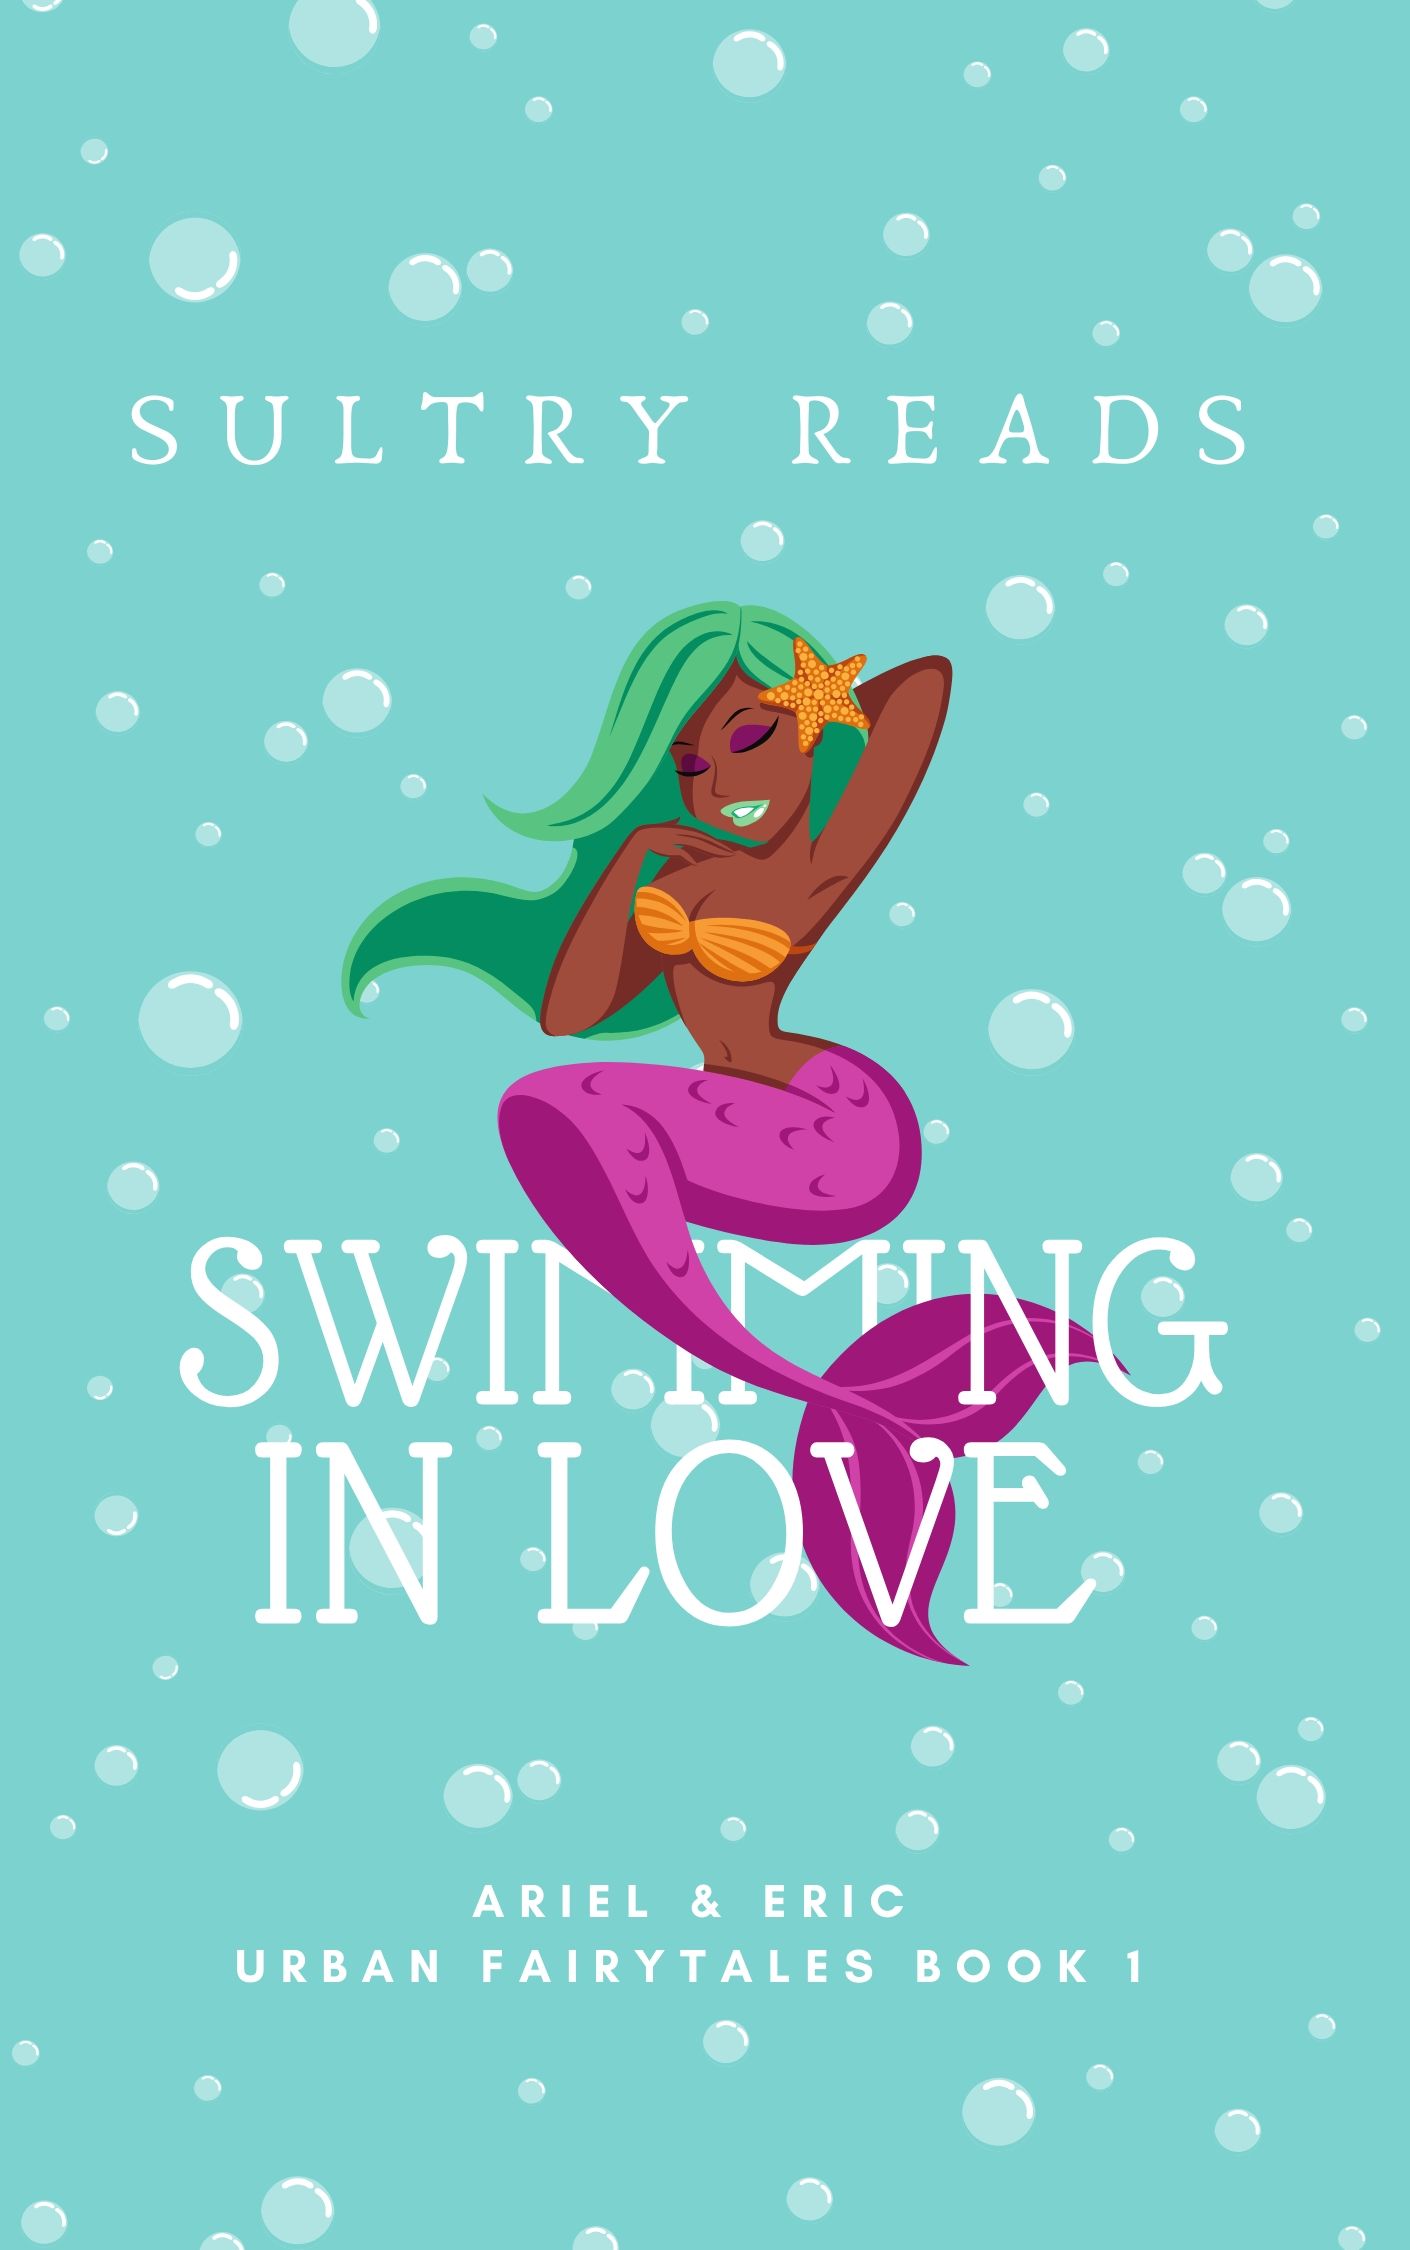 FREE: Swimming in Love: Ariel & Eric by Sultry Reads